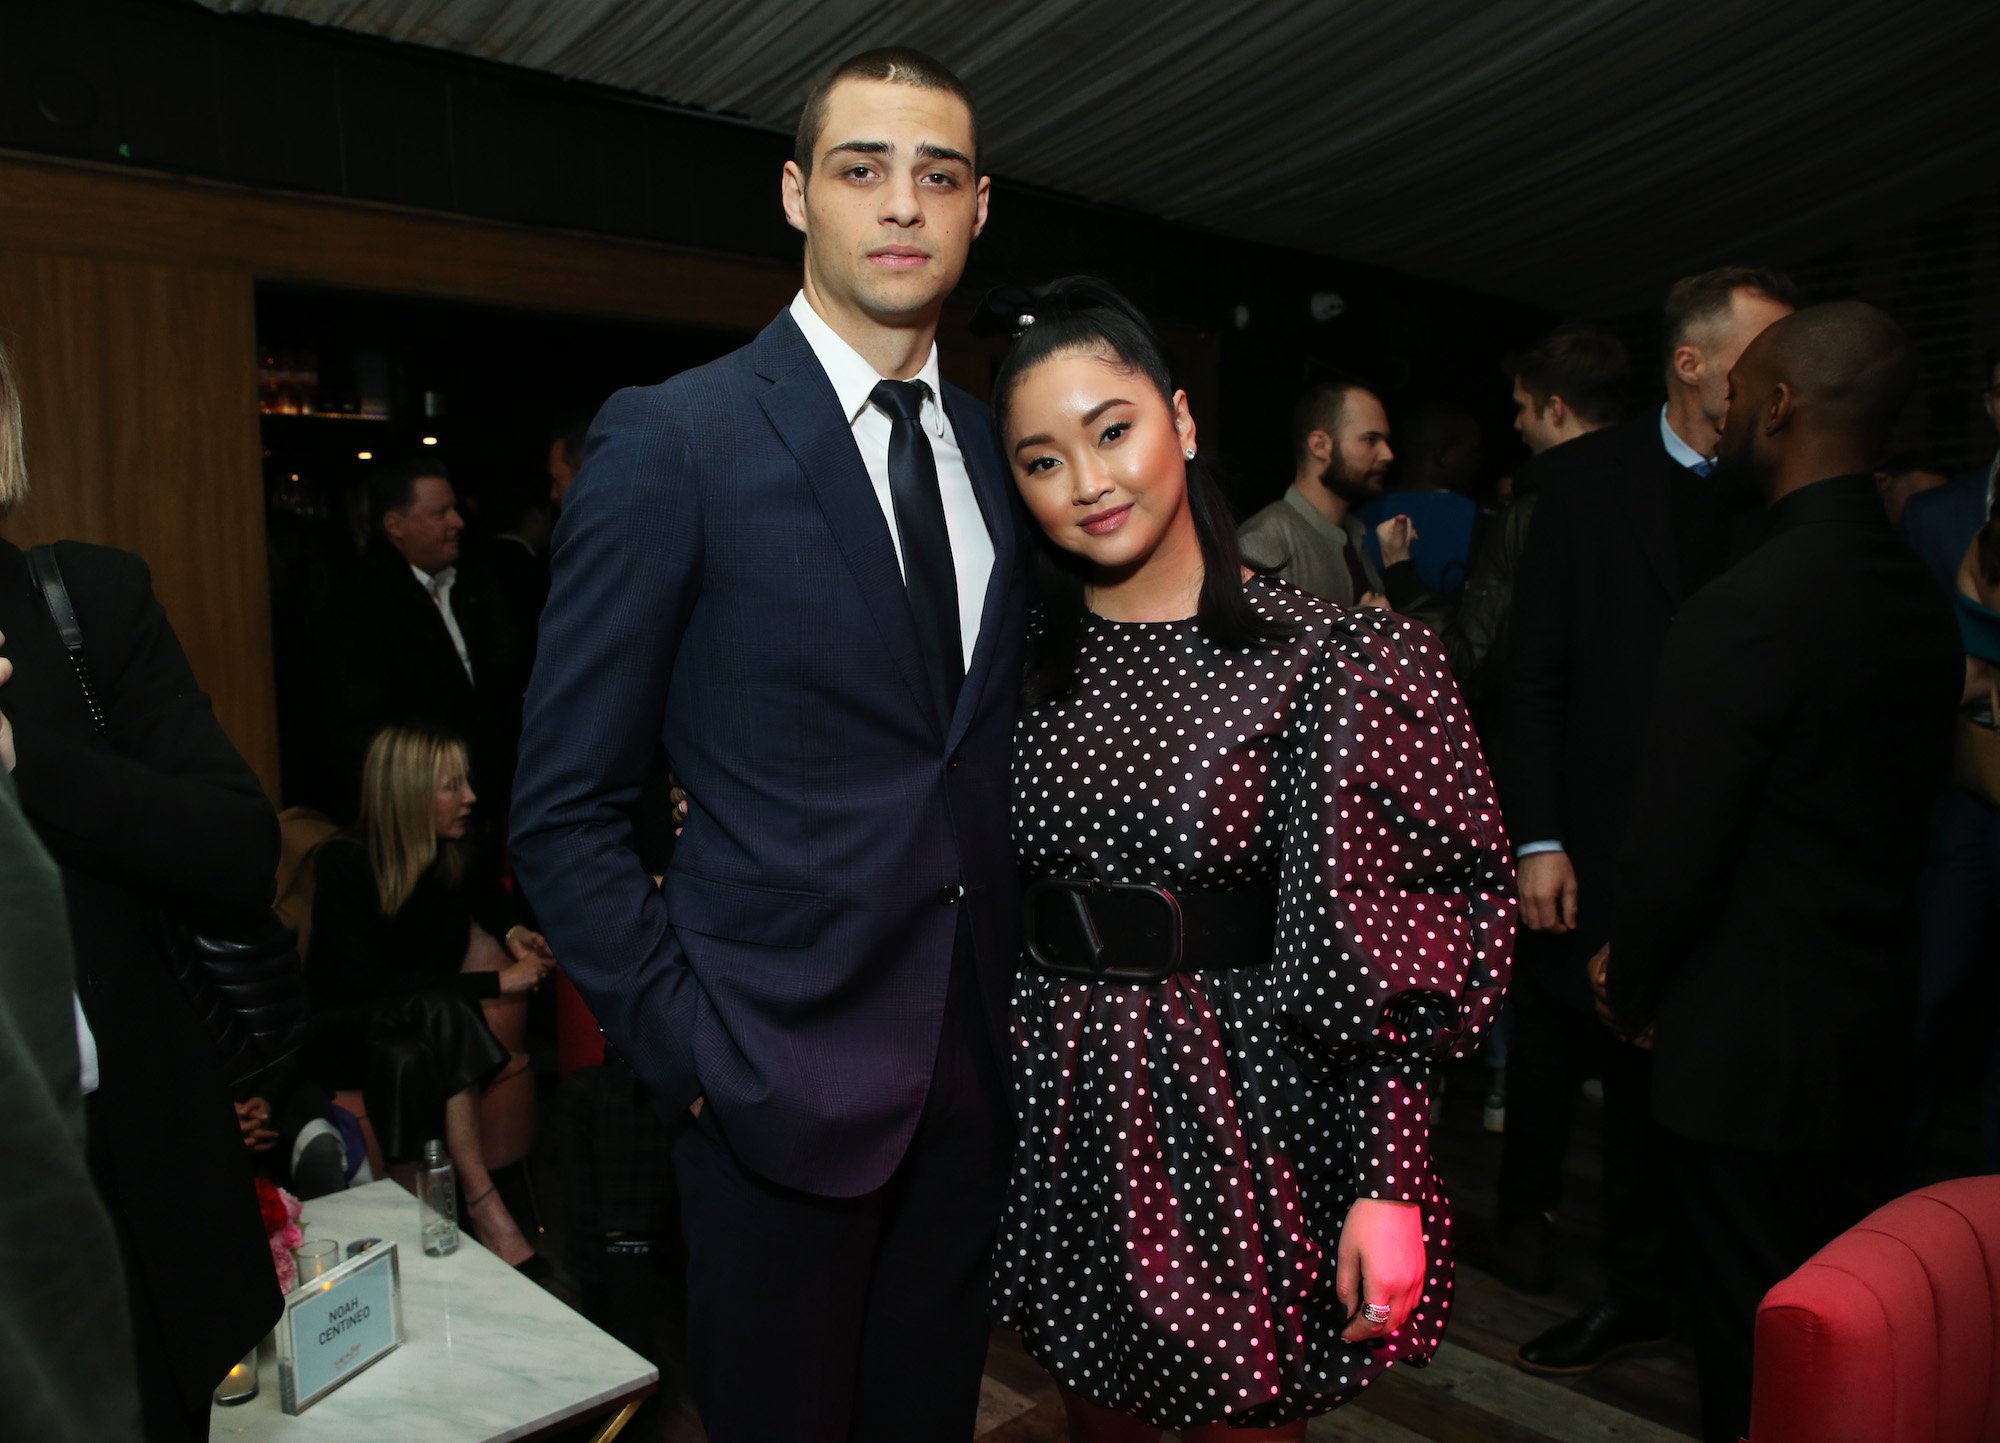 ‘To All the Boys I’ve Loved Before’: Lana Condor and Noah Centineo Had a Serious Mutual Crush